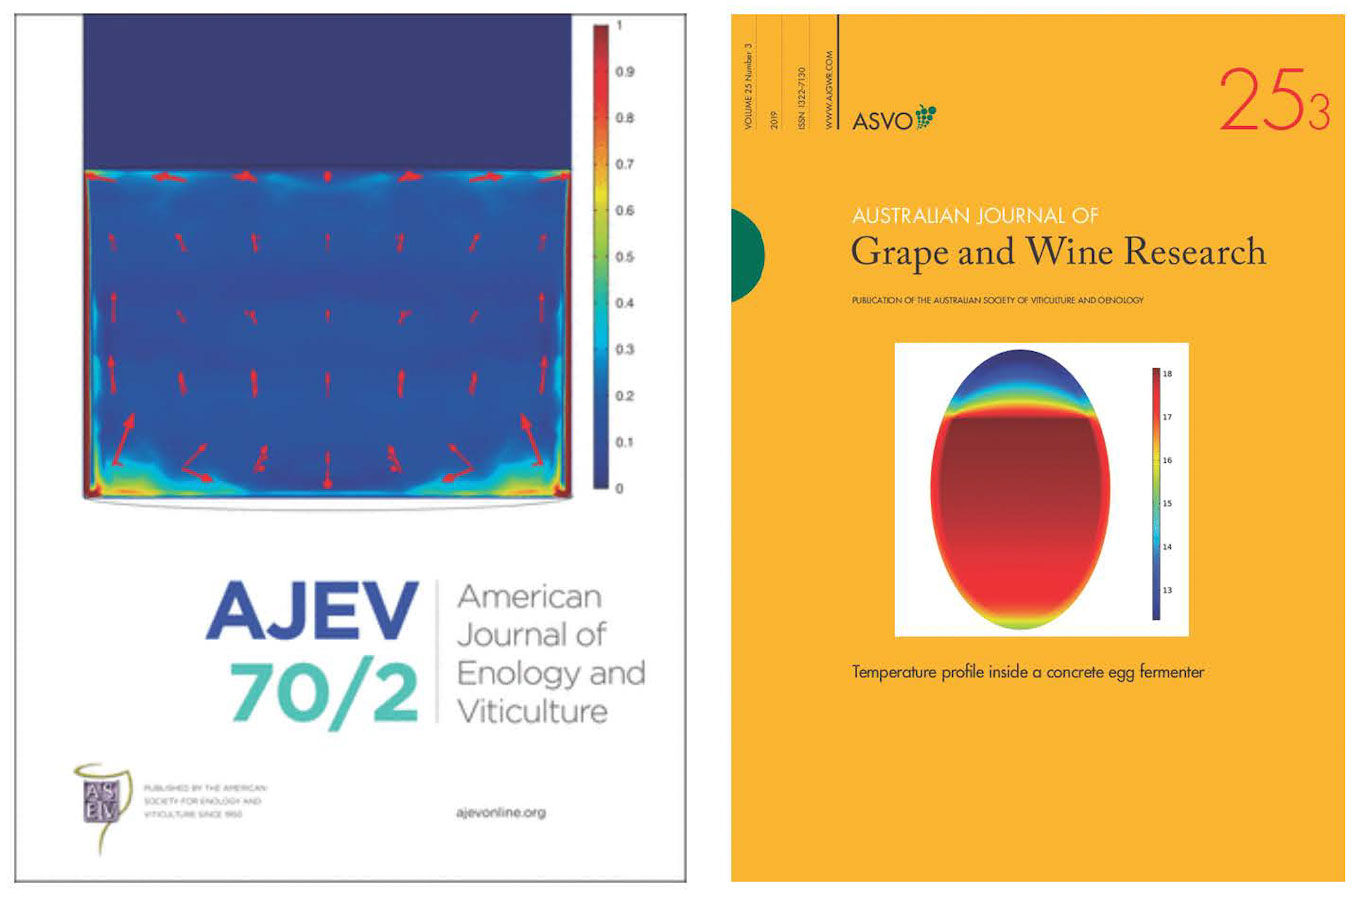 journal covers with Dr. Block's research focused